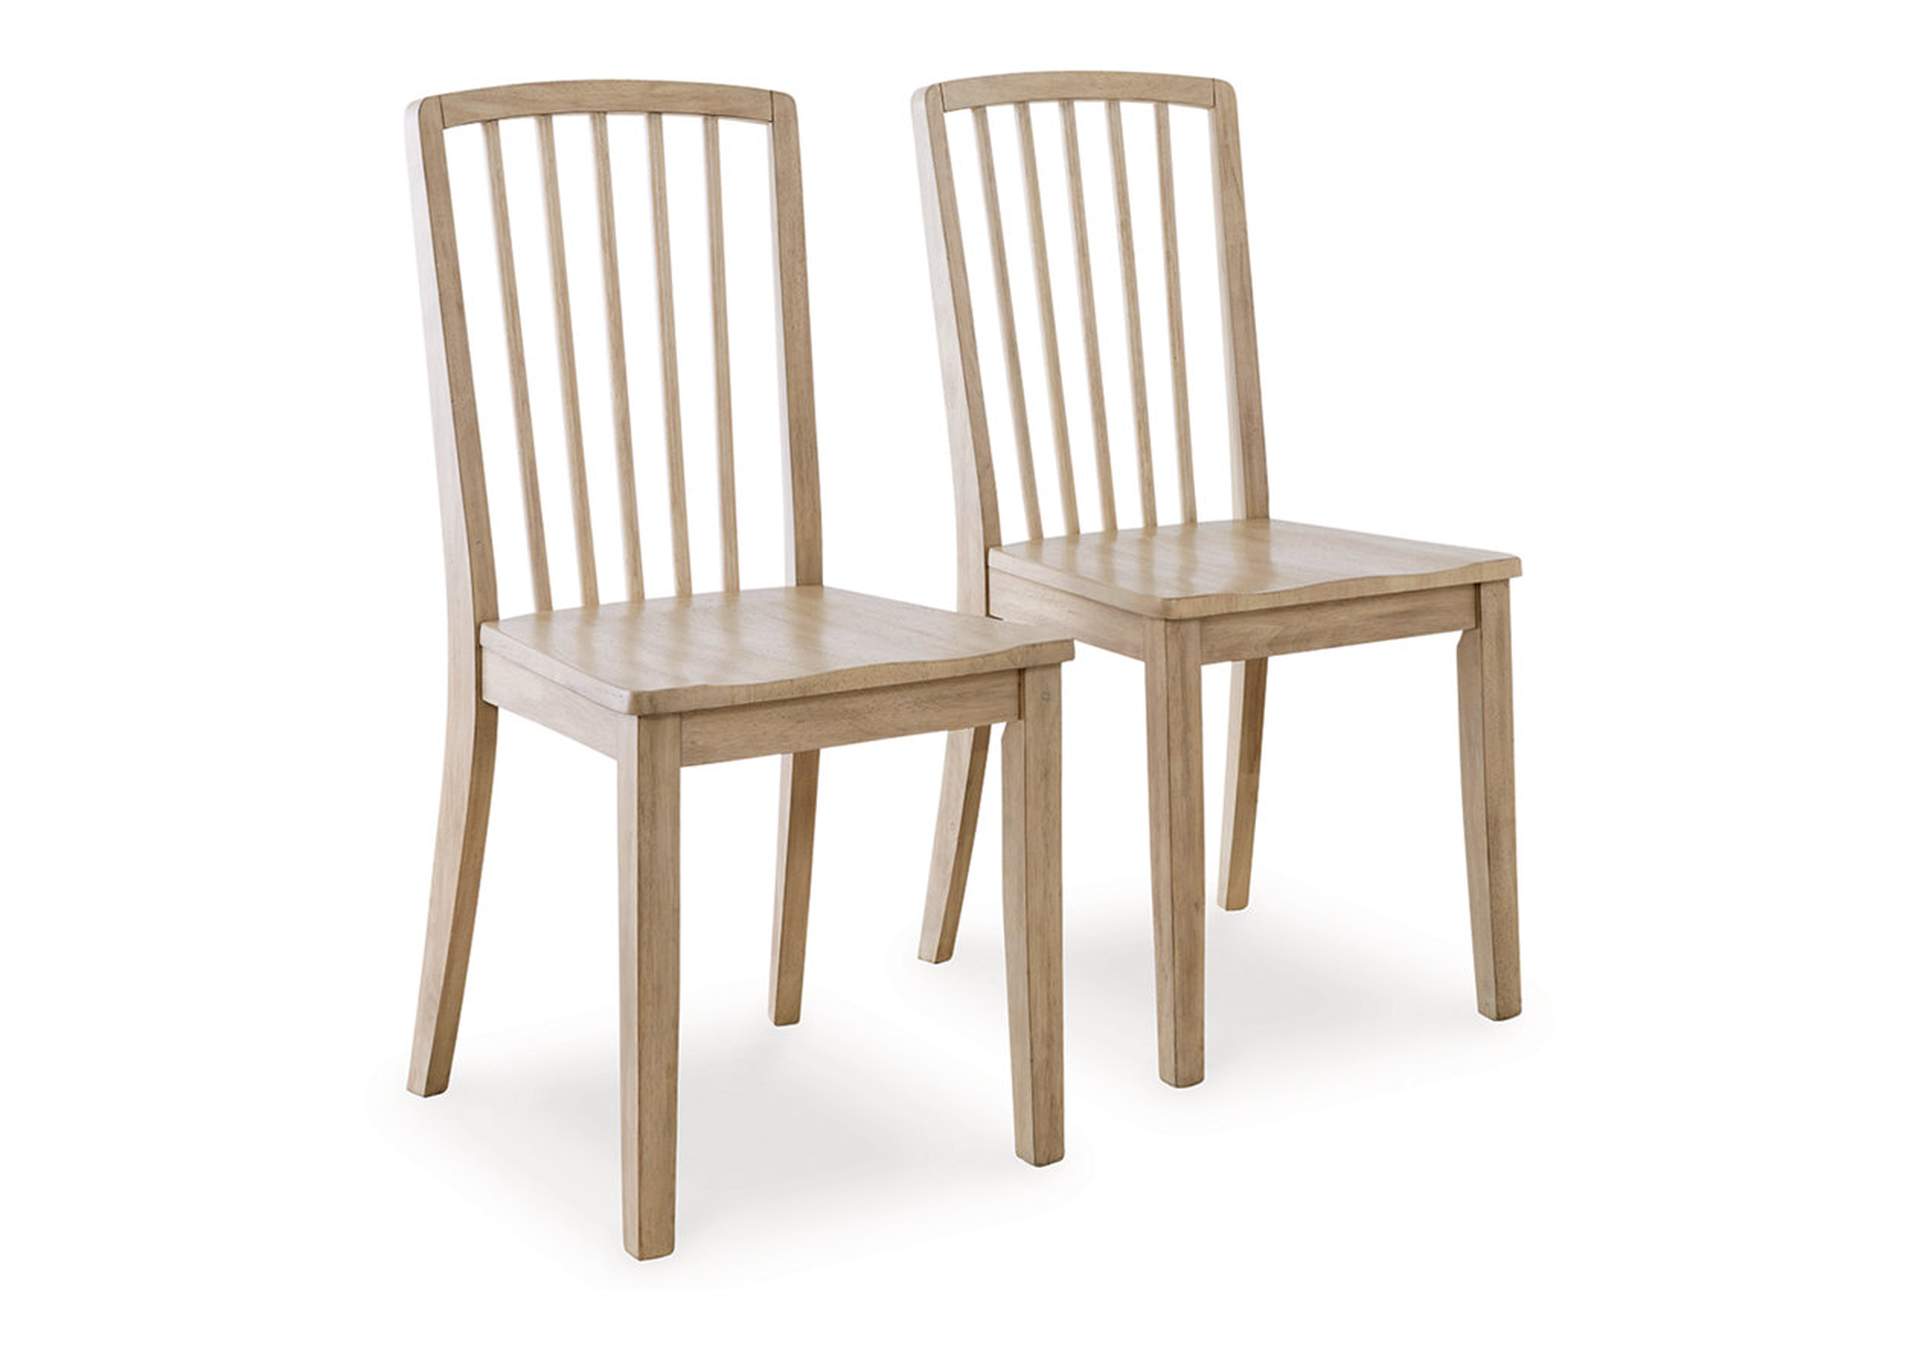 Gleanville Dining Chair,Signature Design By Ashley